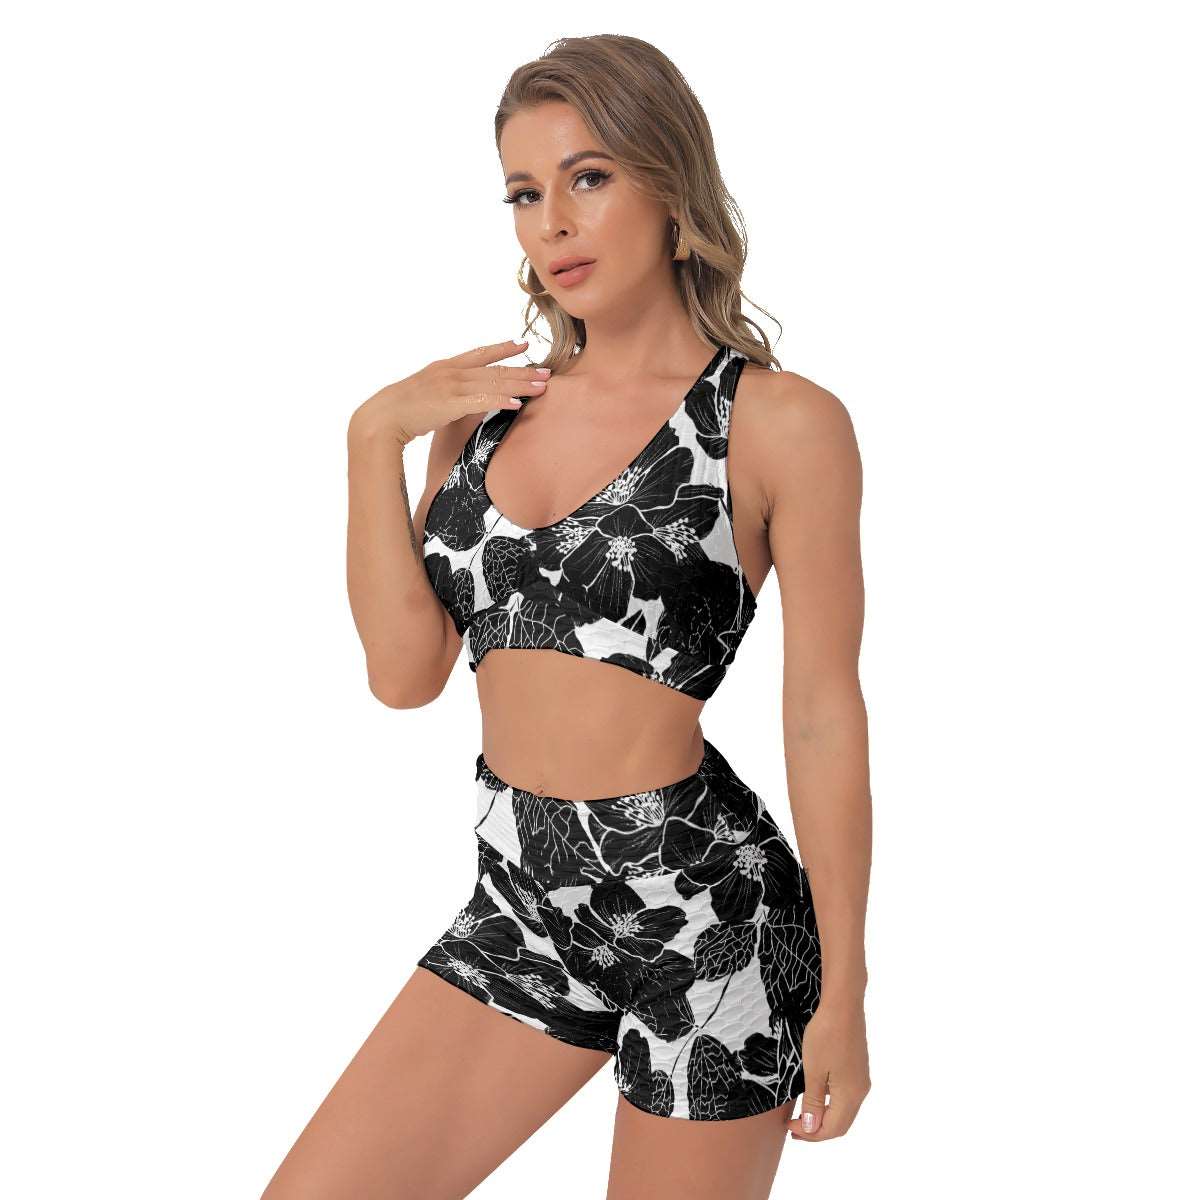 Black and White Bouquet Sports Bra and Shorts Set - AnimePhysique